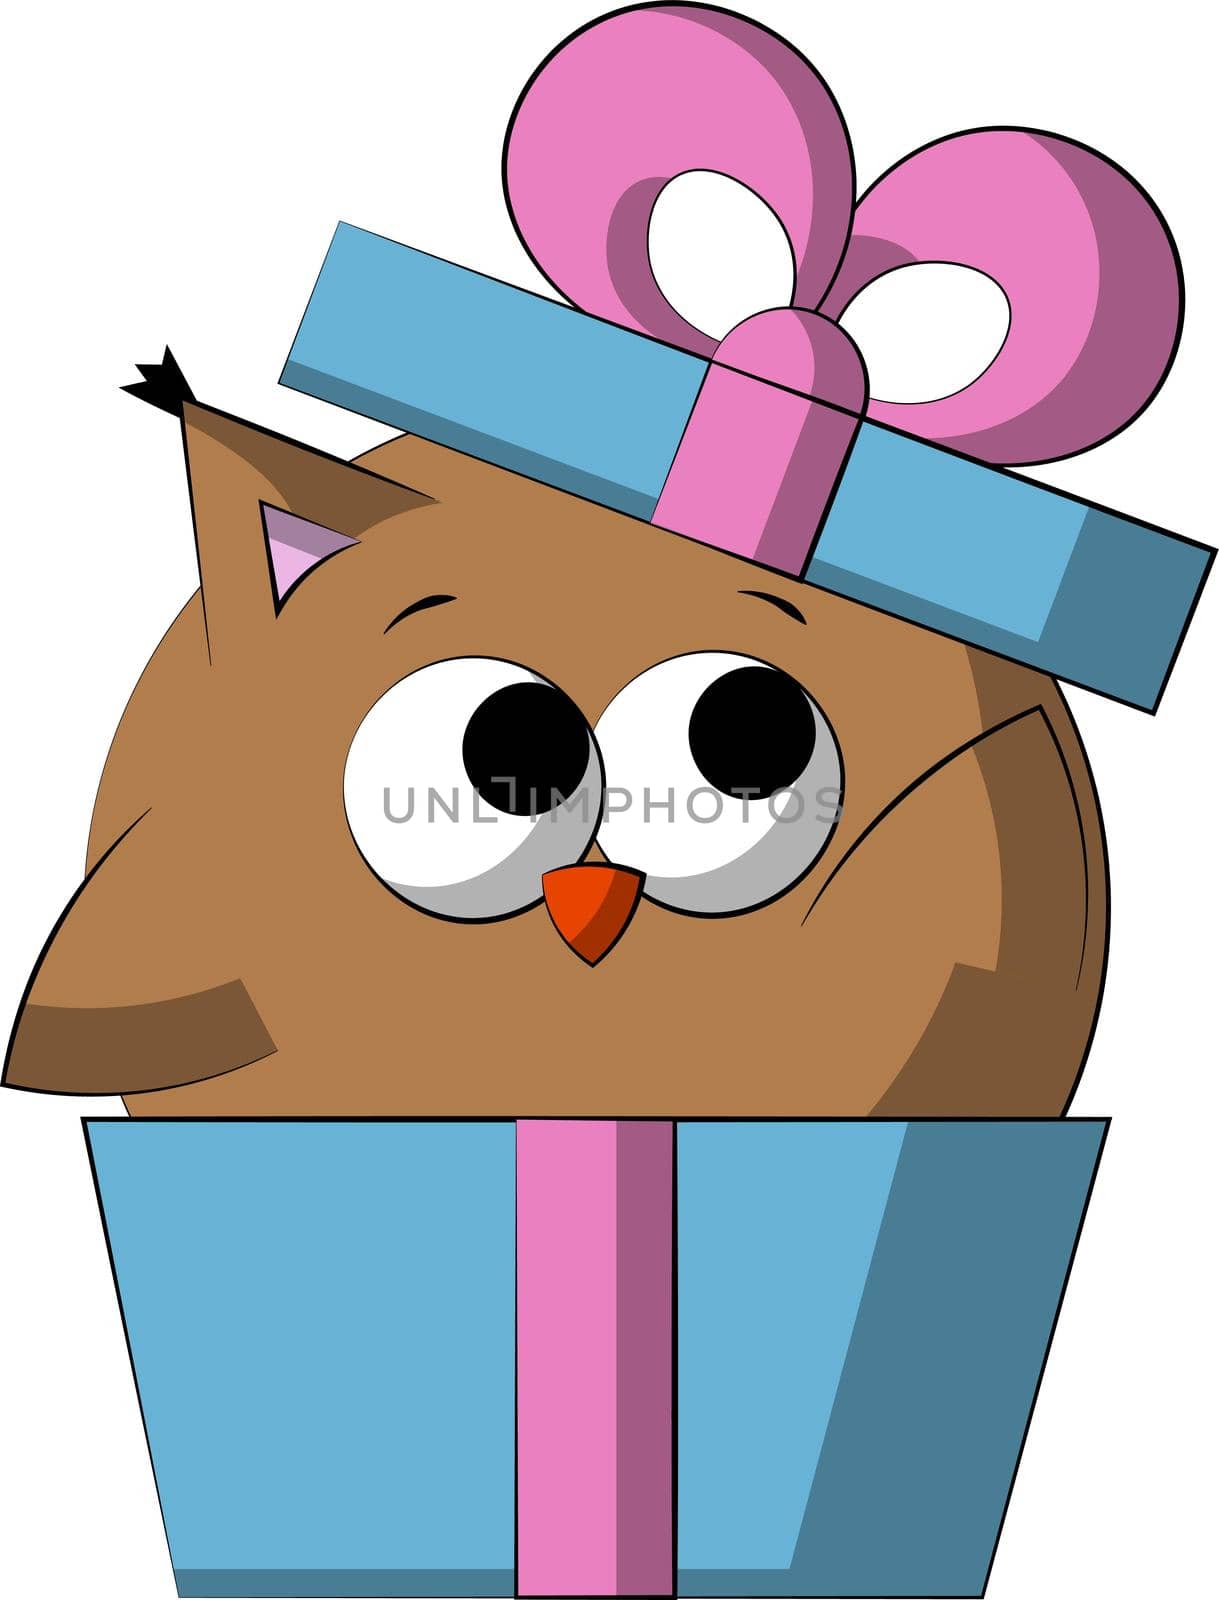 Cute cartoon Owl in gift box. Draw illustration in color by AnastasiaPen